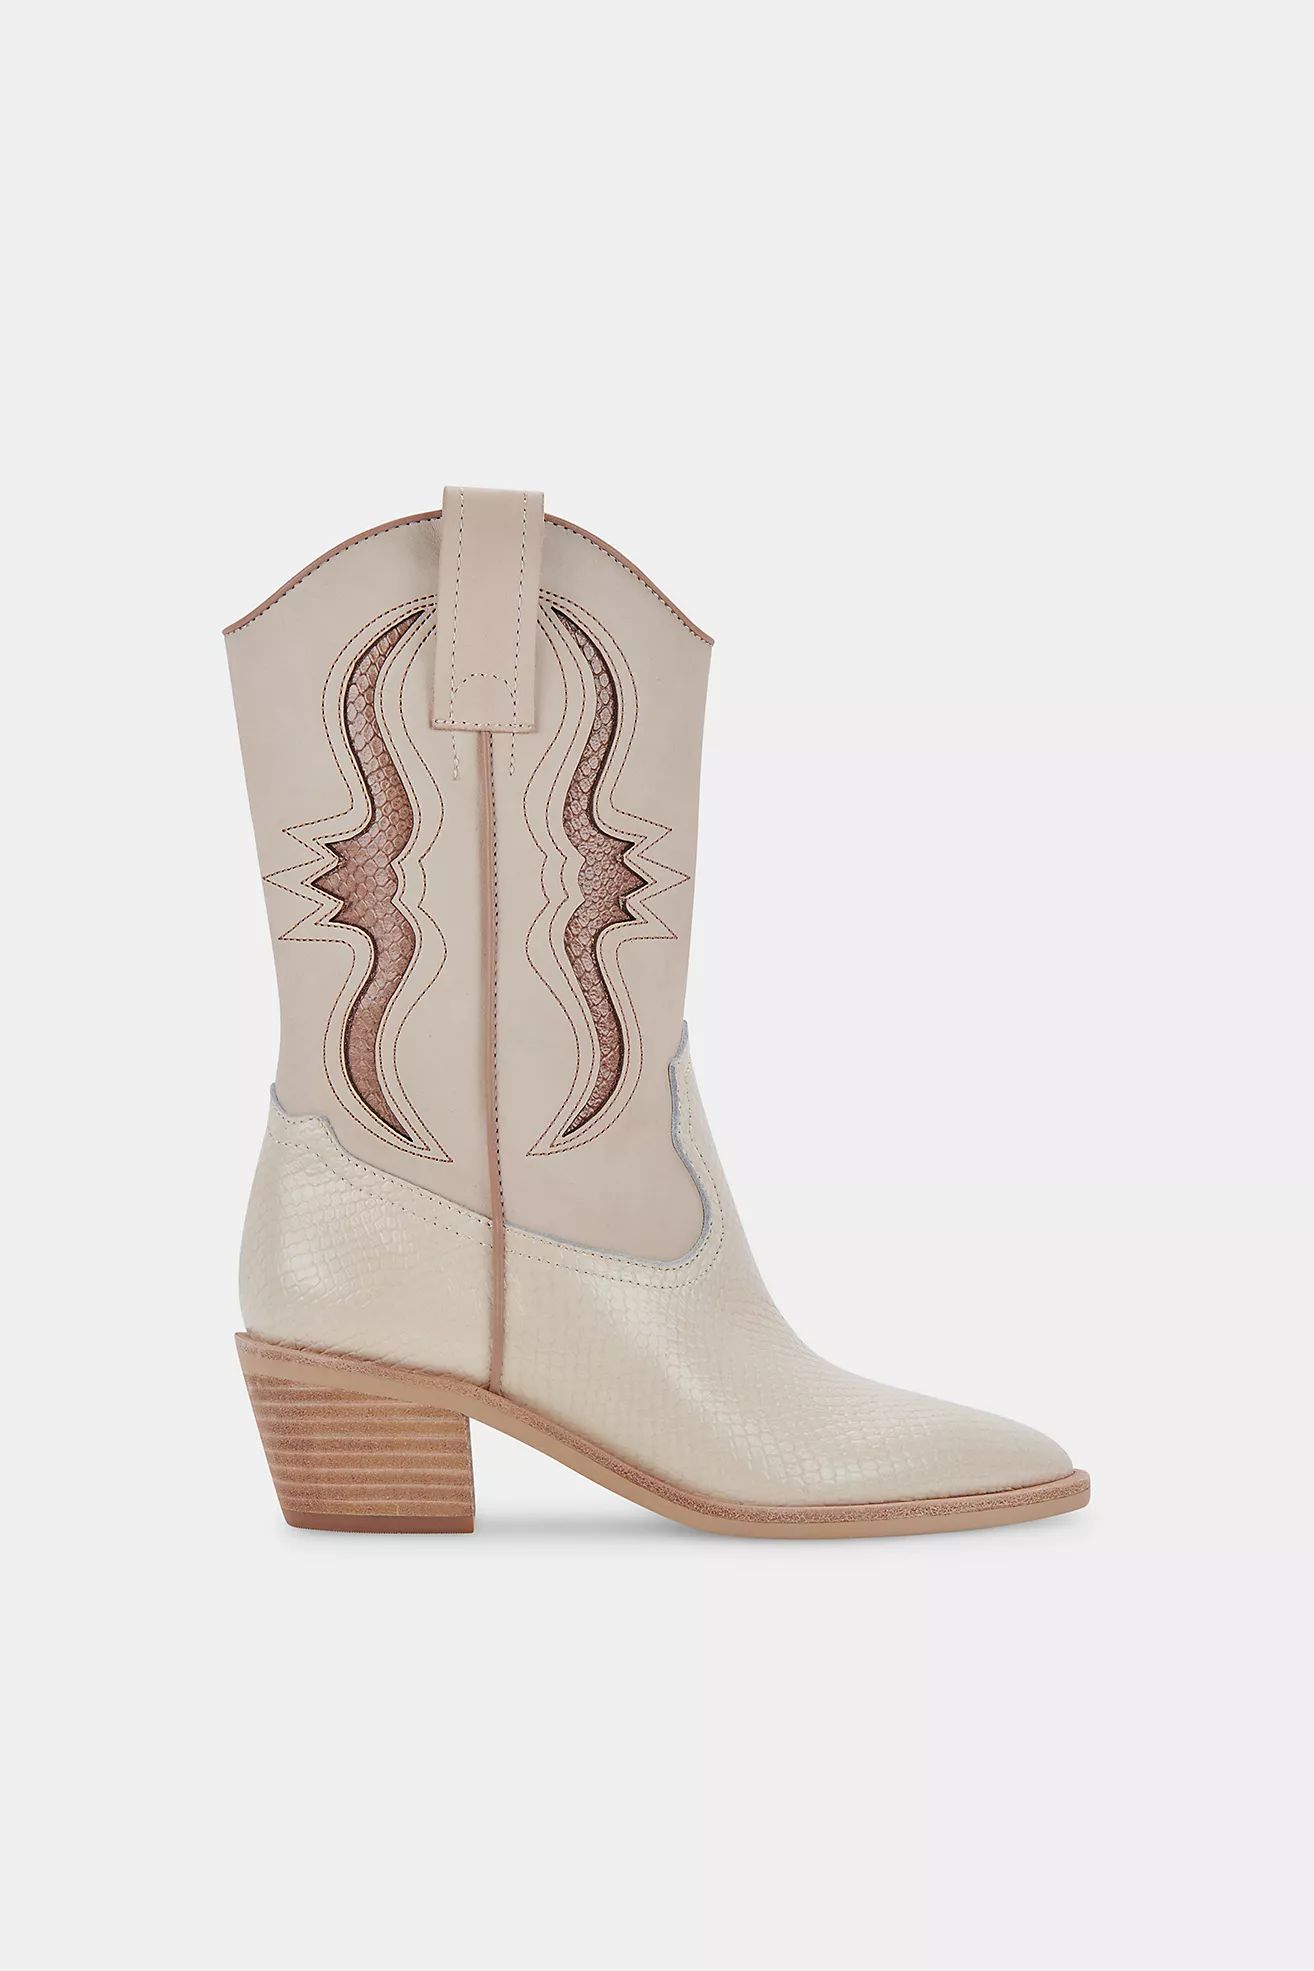 Dolce Vita Suzzy Western Boots | Anthropologie (US)